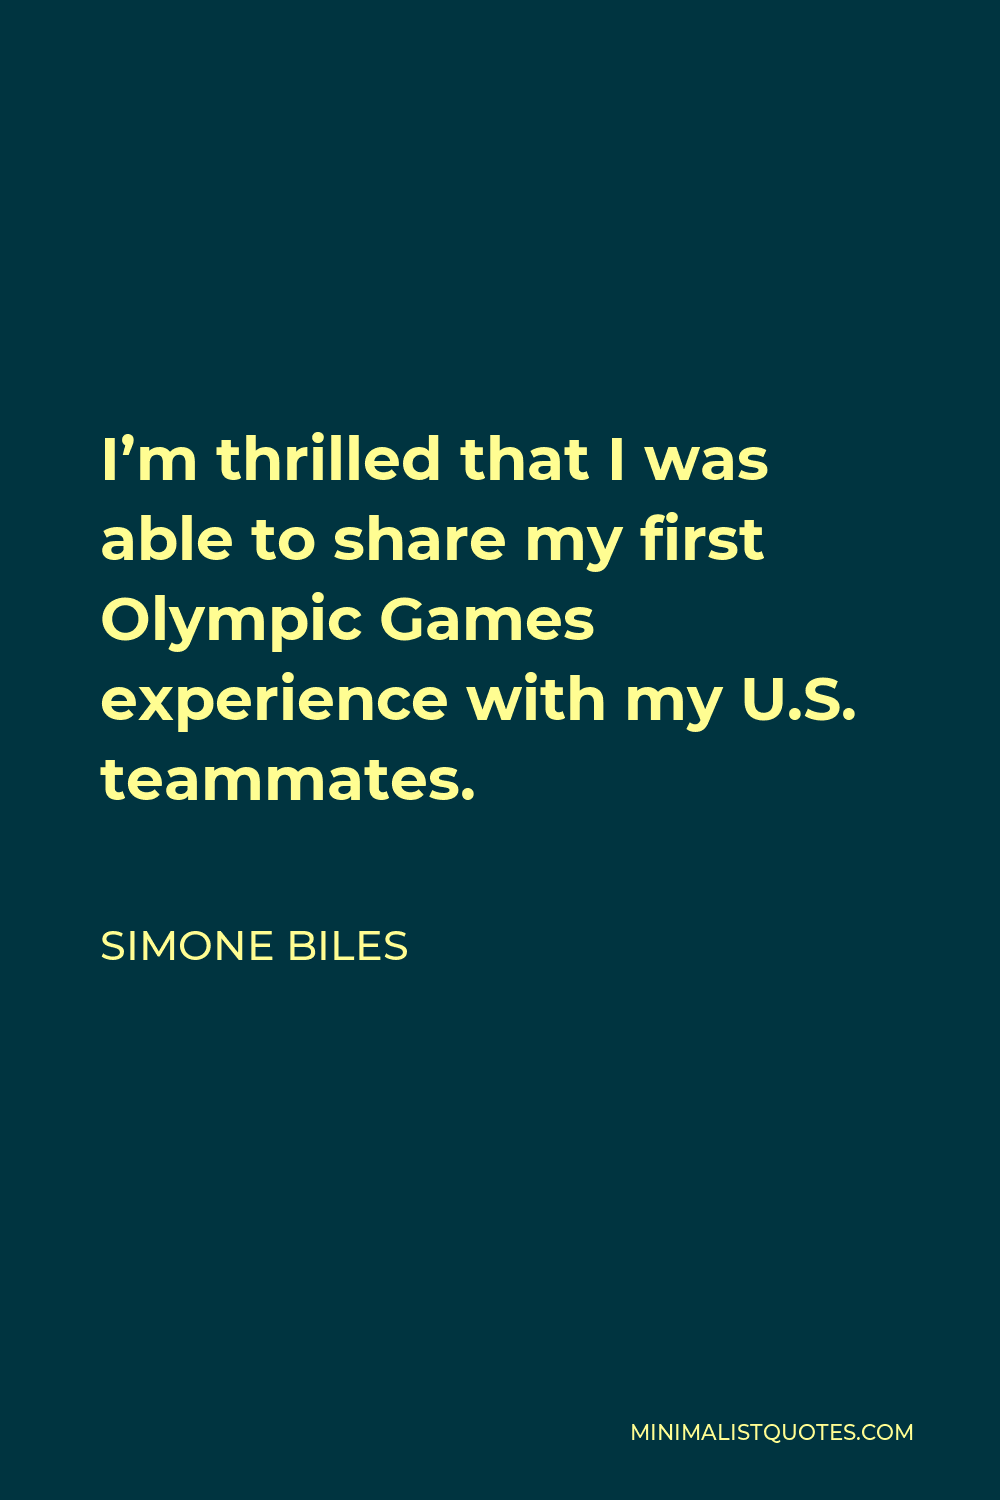 Simone Biles Quote - I’m thrilled that I was able to share my first Olympic Games experience with my U.S. teammates.